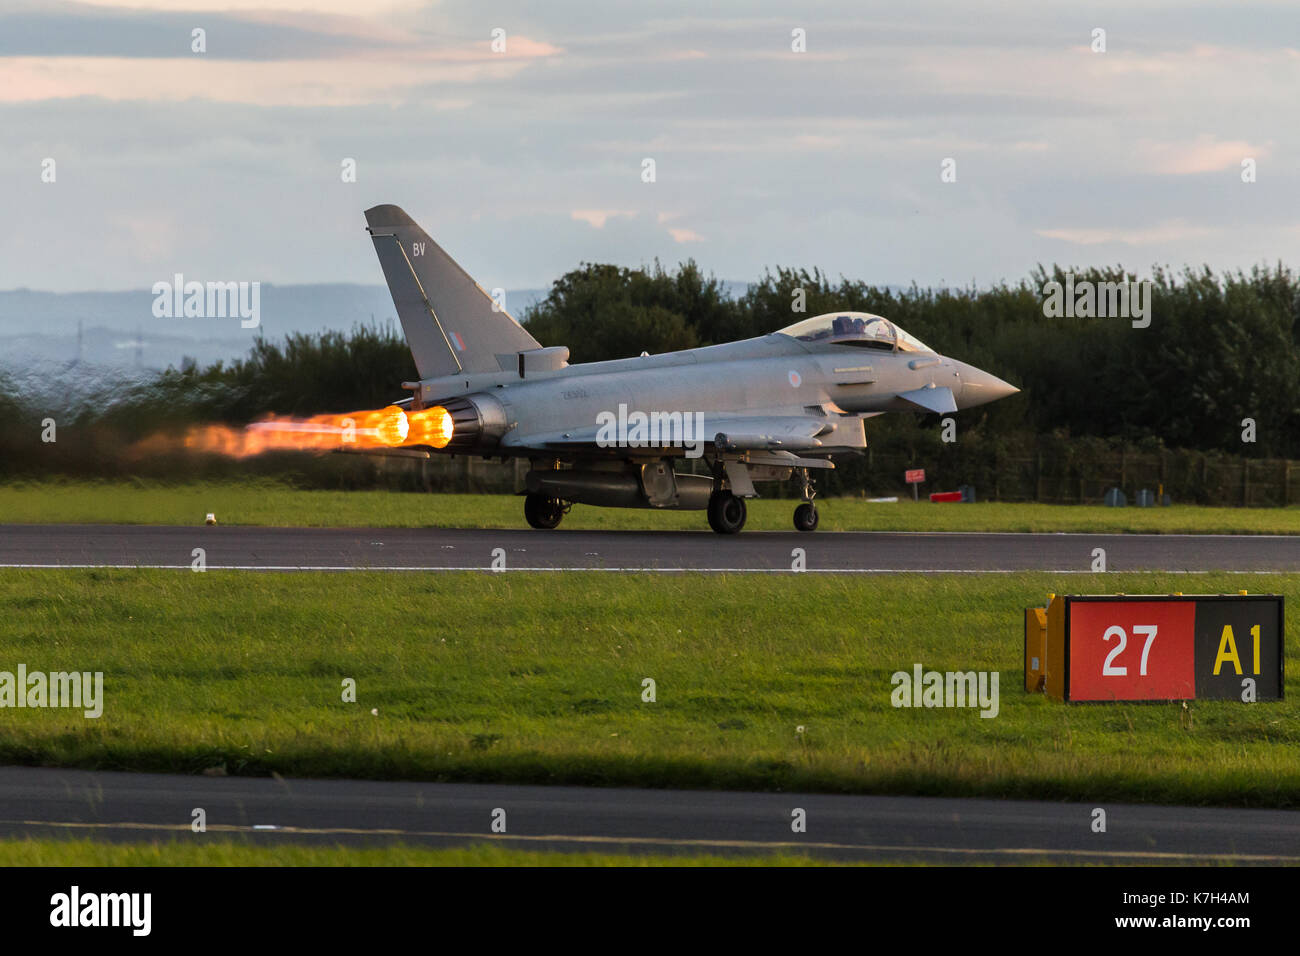 Performance takeoff by a Royal Air Force Typhoon FGR4 from Liverpool John Lennon airport during an autumn evening in 2017. Stock Photo